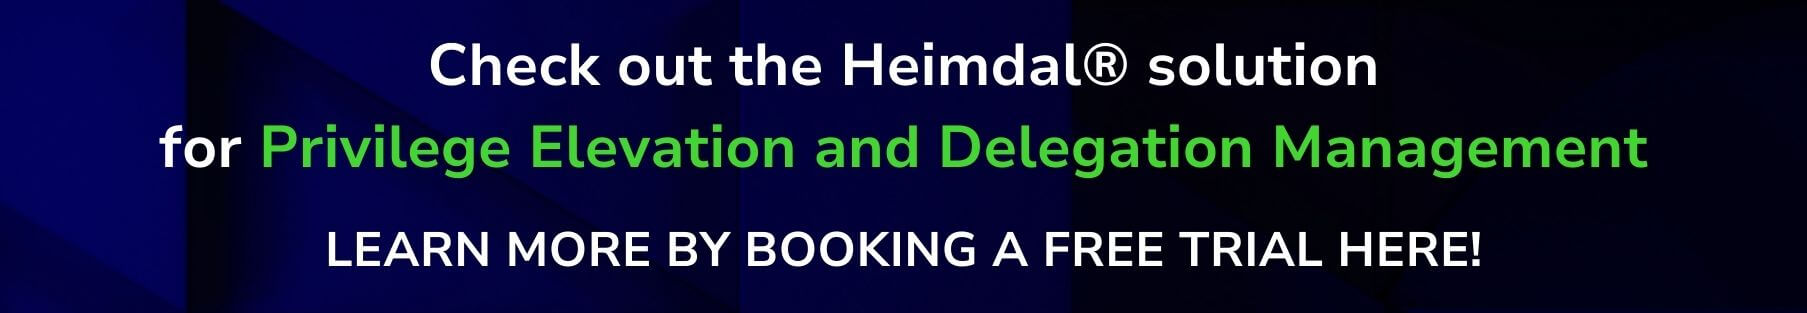 call to action, heimdal, blue background